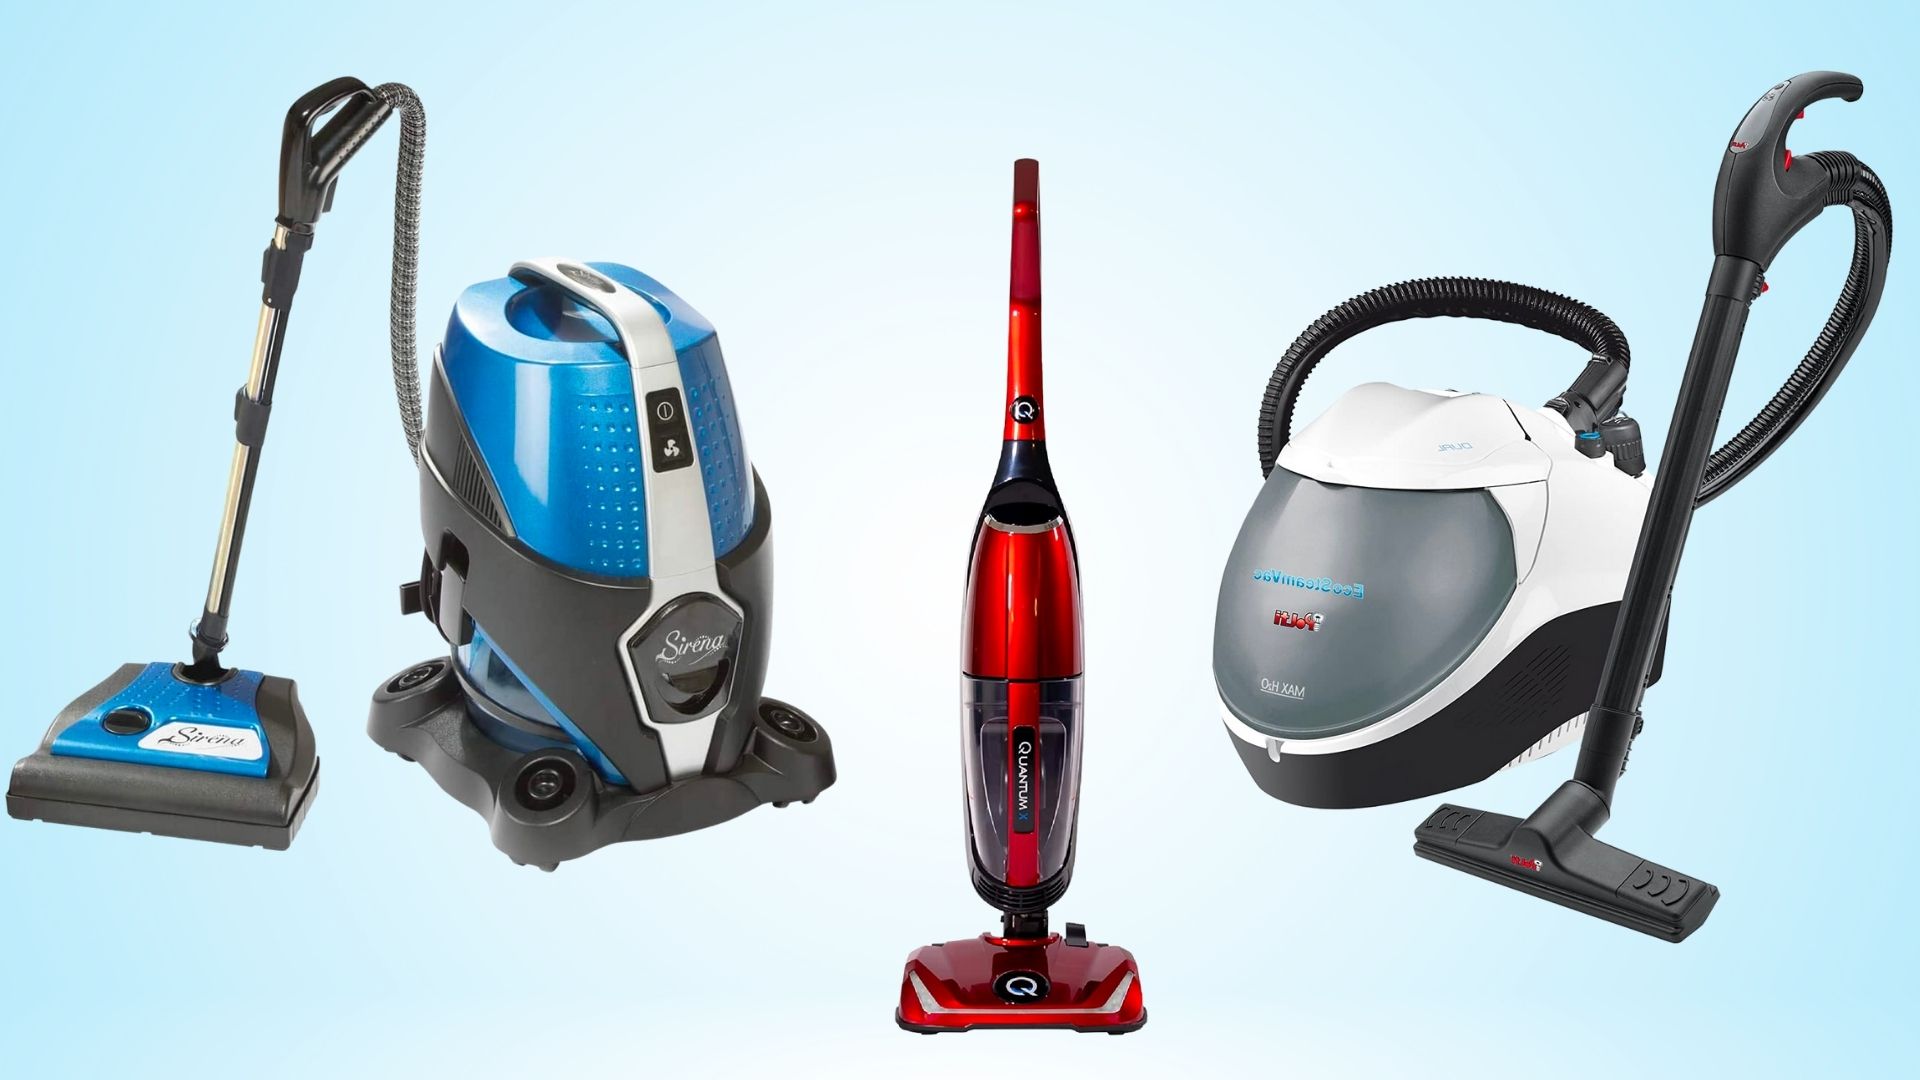 This Handheld Vacuum That's an 'Indispensable Cleaning Companion